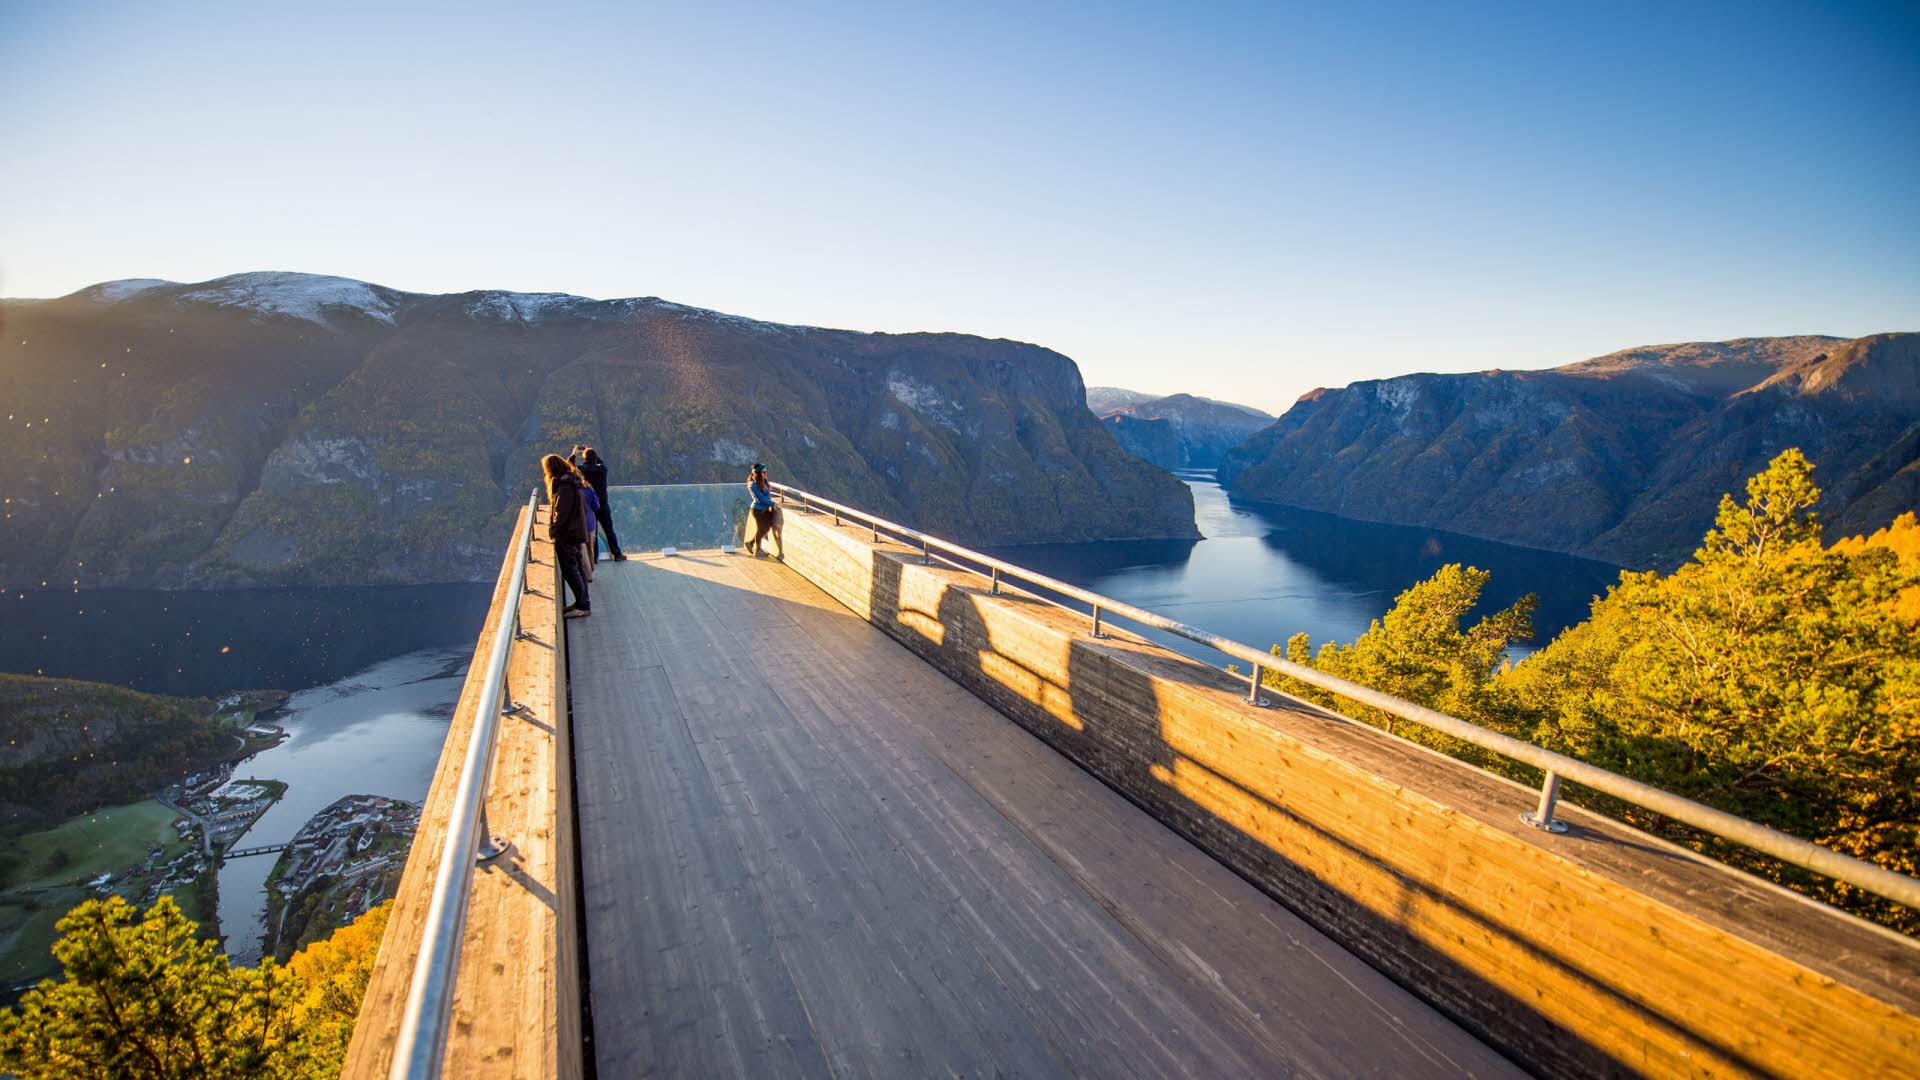 A panoramic sunset view from the Stegastein viewing platform, with 2 people admiring the view of the Aurlandsfjord in autumn colours